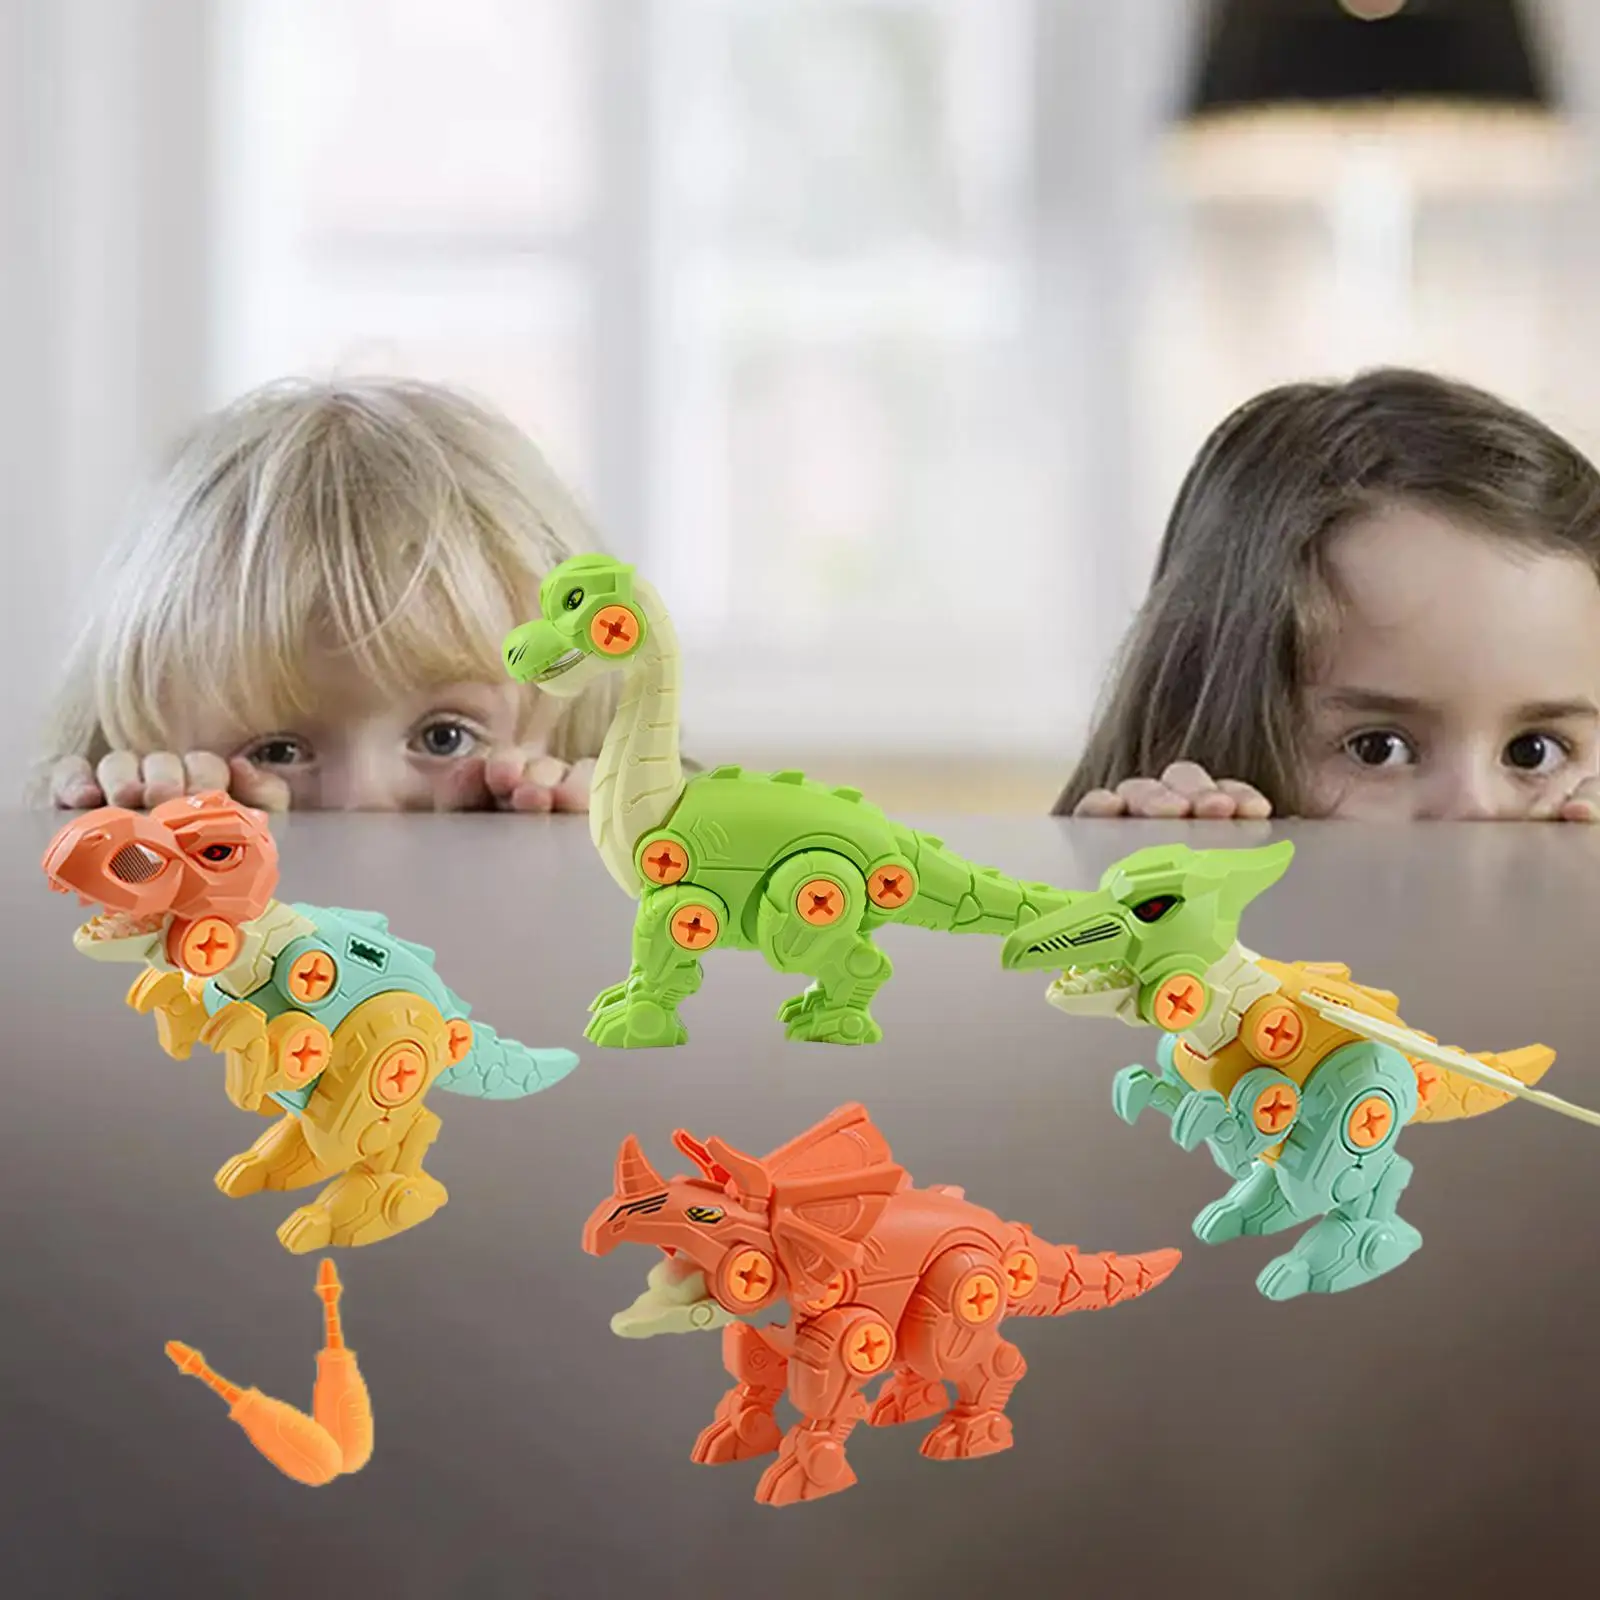 4x Dinosaur Toys Set Construction Toy Educational Toy for Children Toddlers